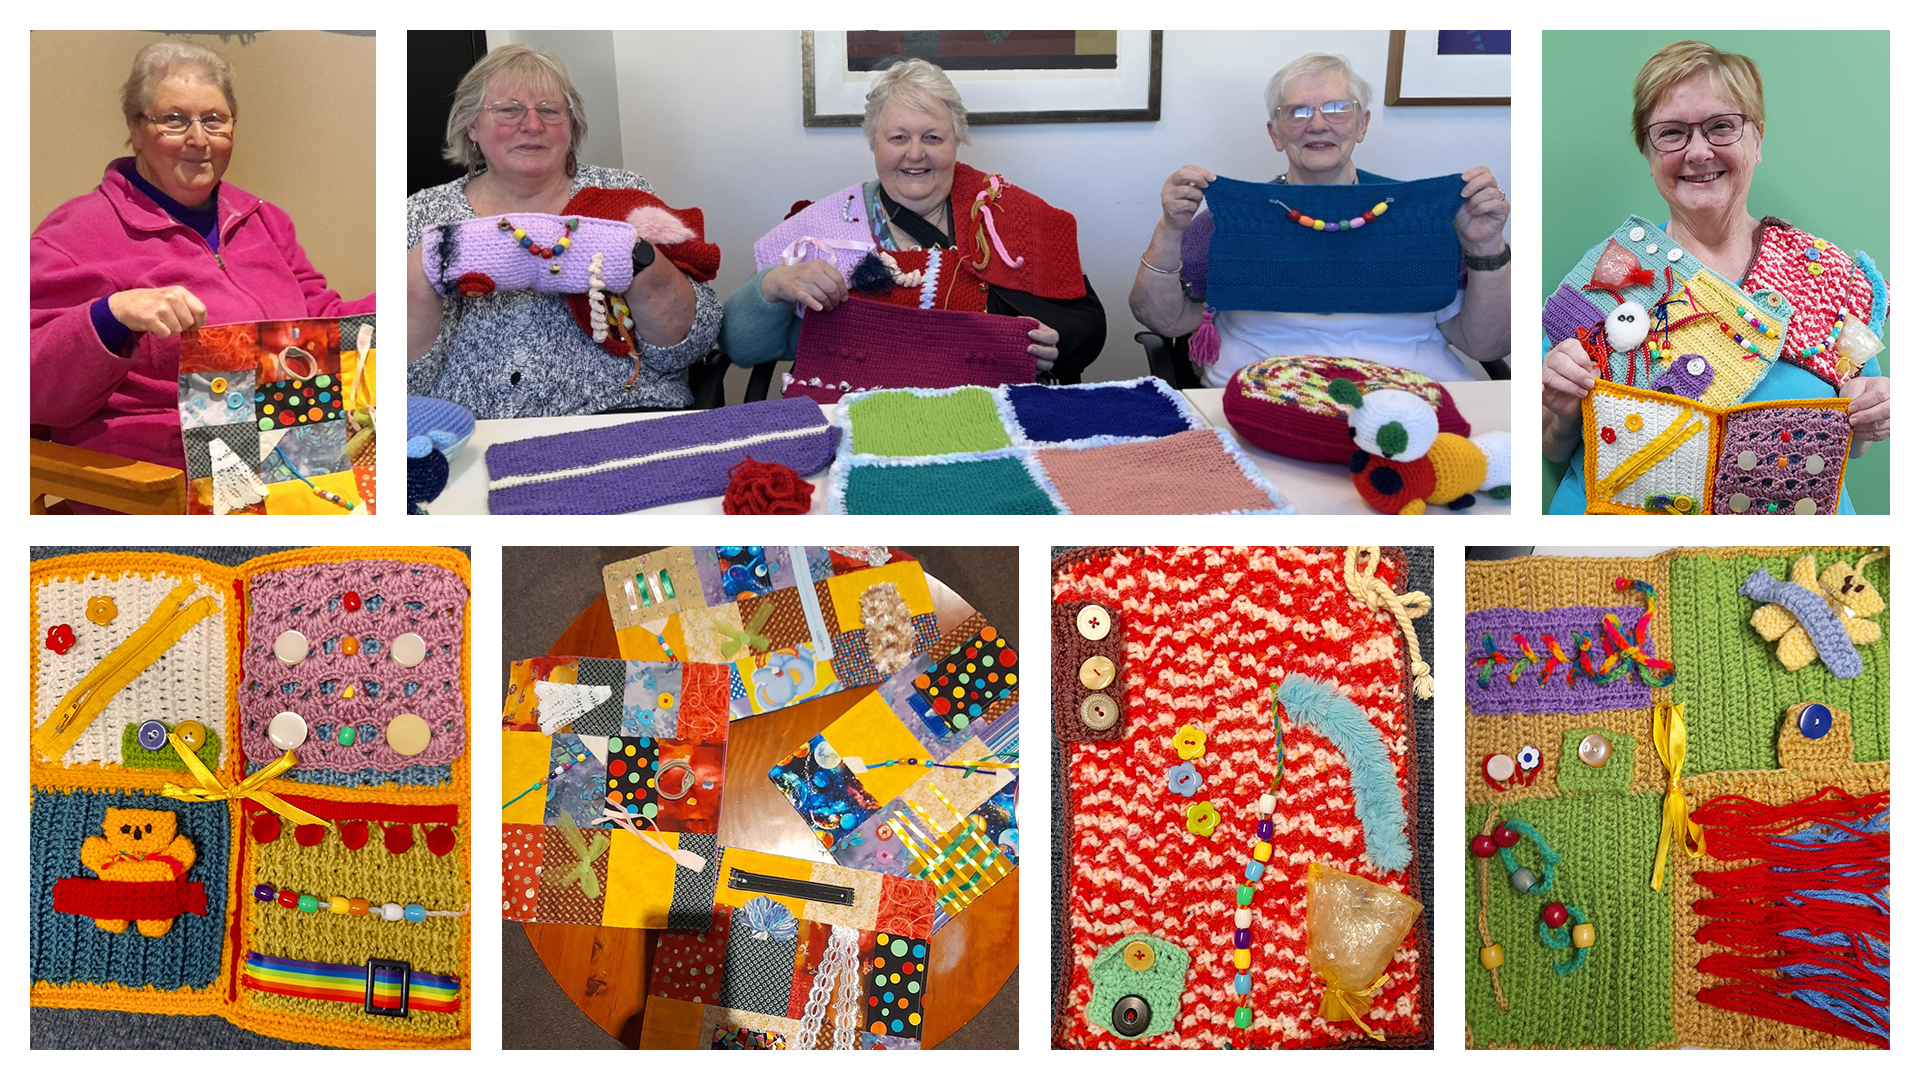 A grid of different images shows pictures of various colourful fiddle mats and volunteers creating them.